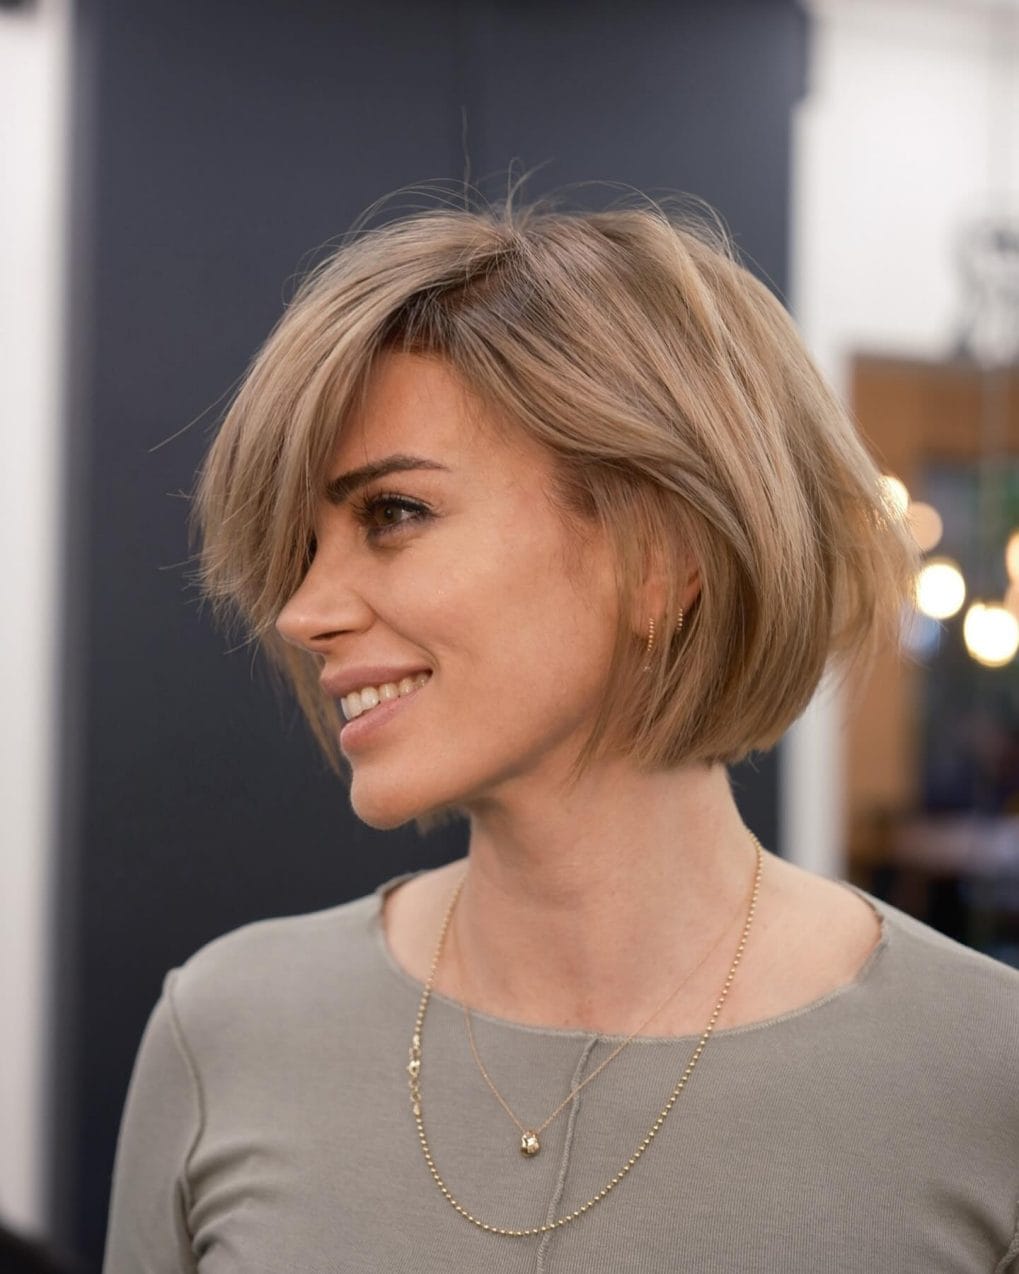 Breezy textured bob cut for cool summer style